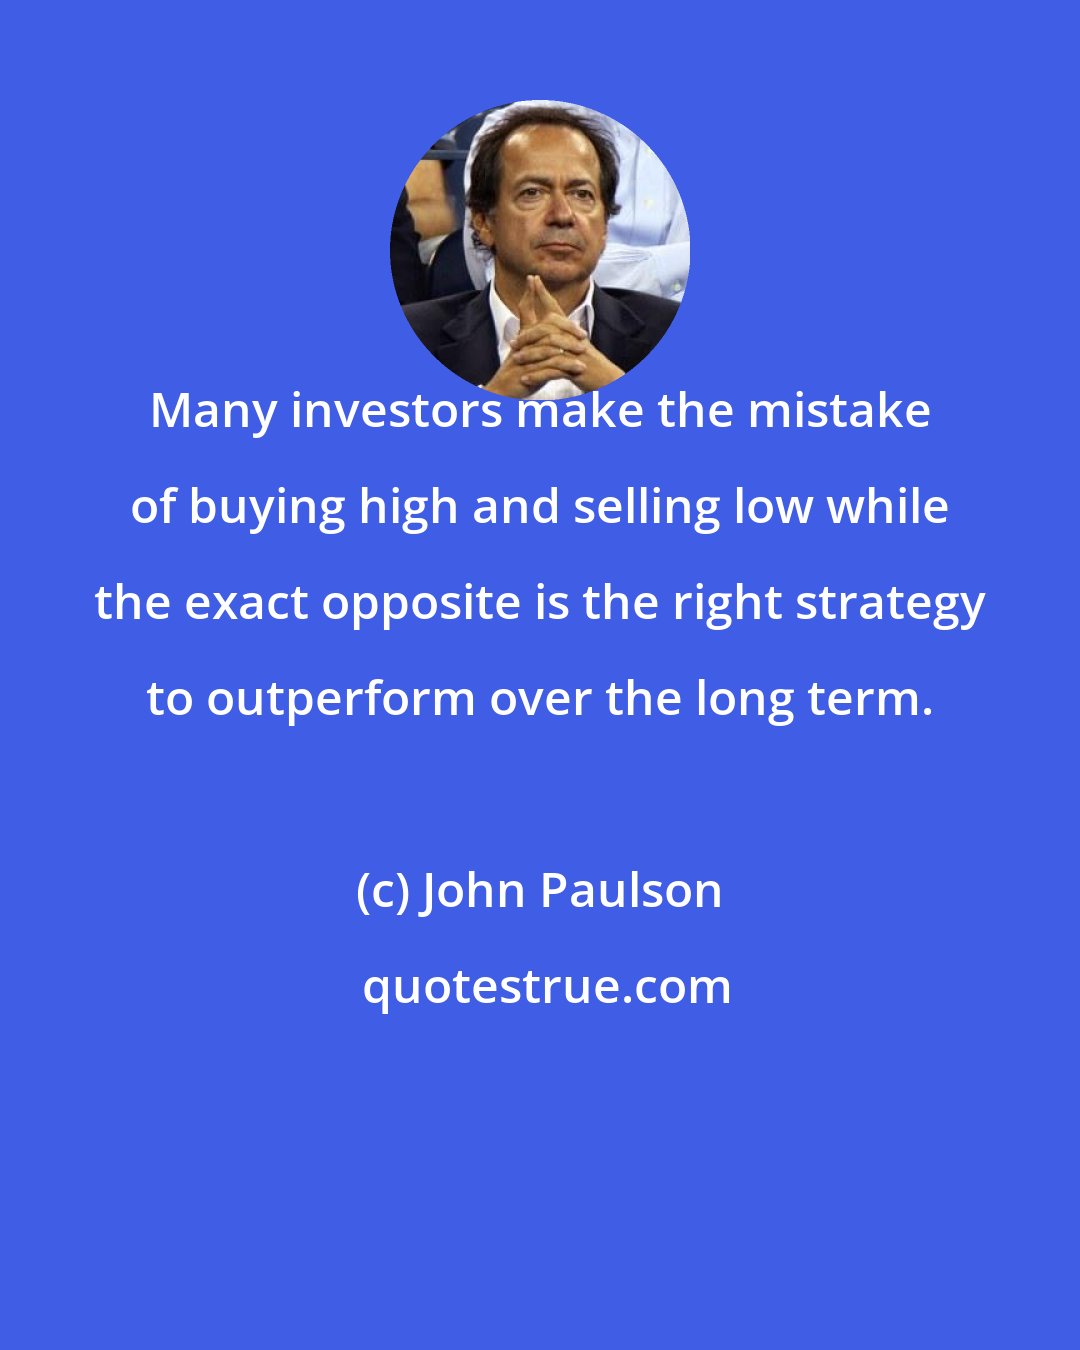 John Paulson: Many investors make the mistake of buying high and selling low while the exact opposite is the right strategy to outperform over the long term.